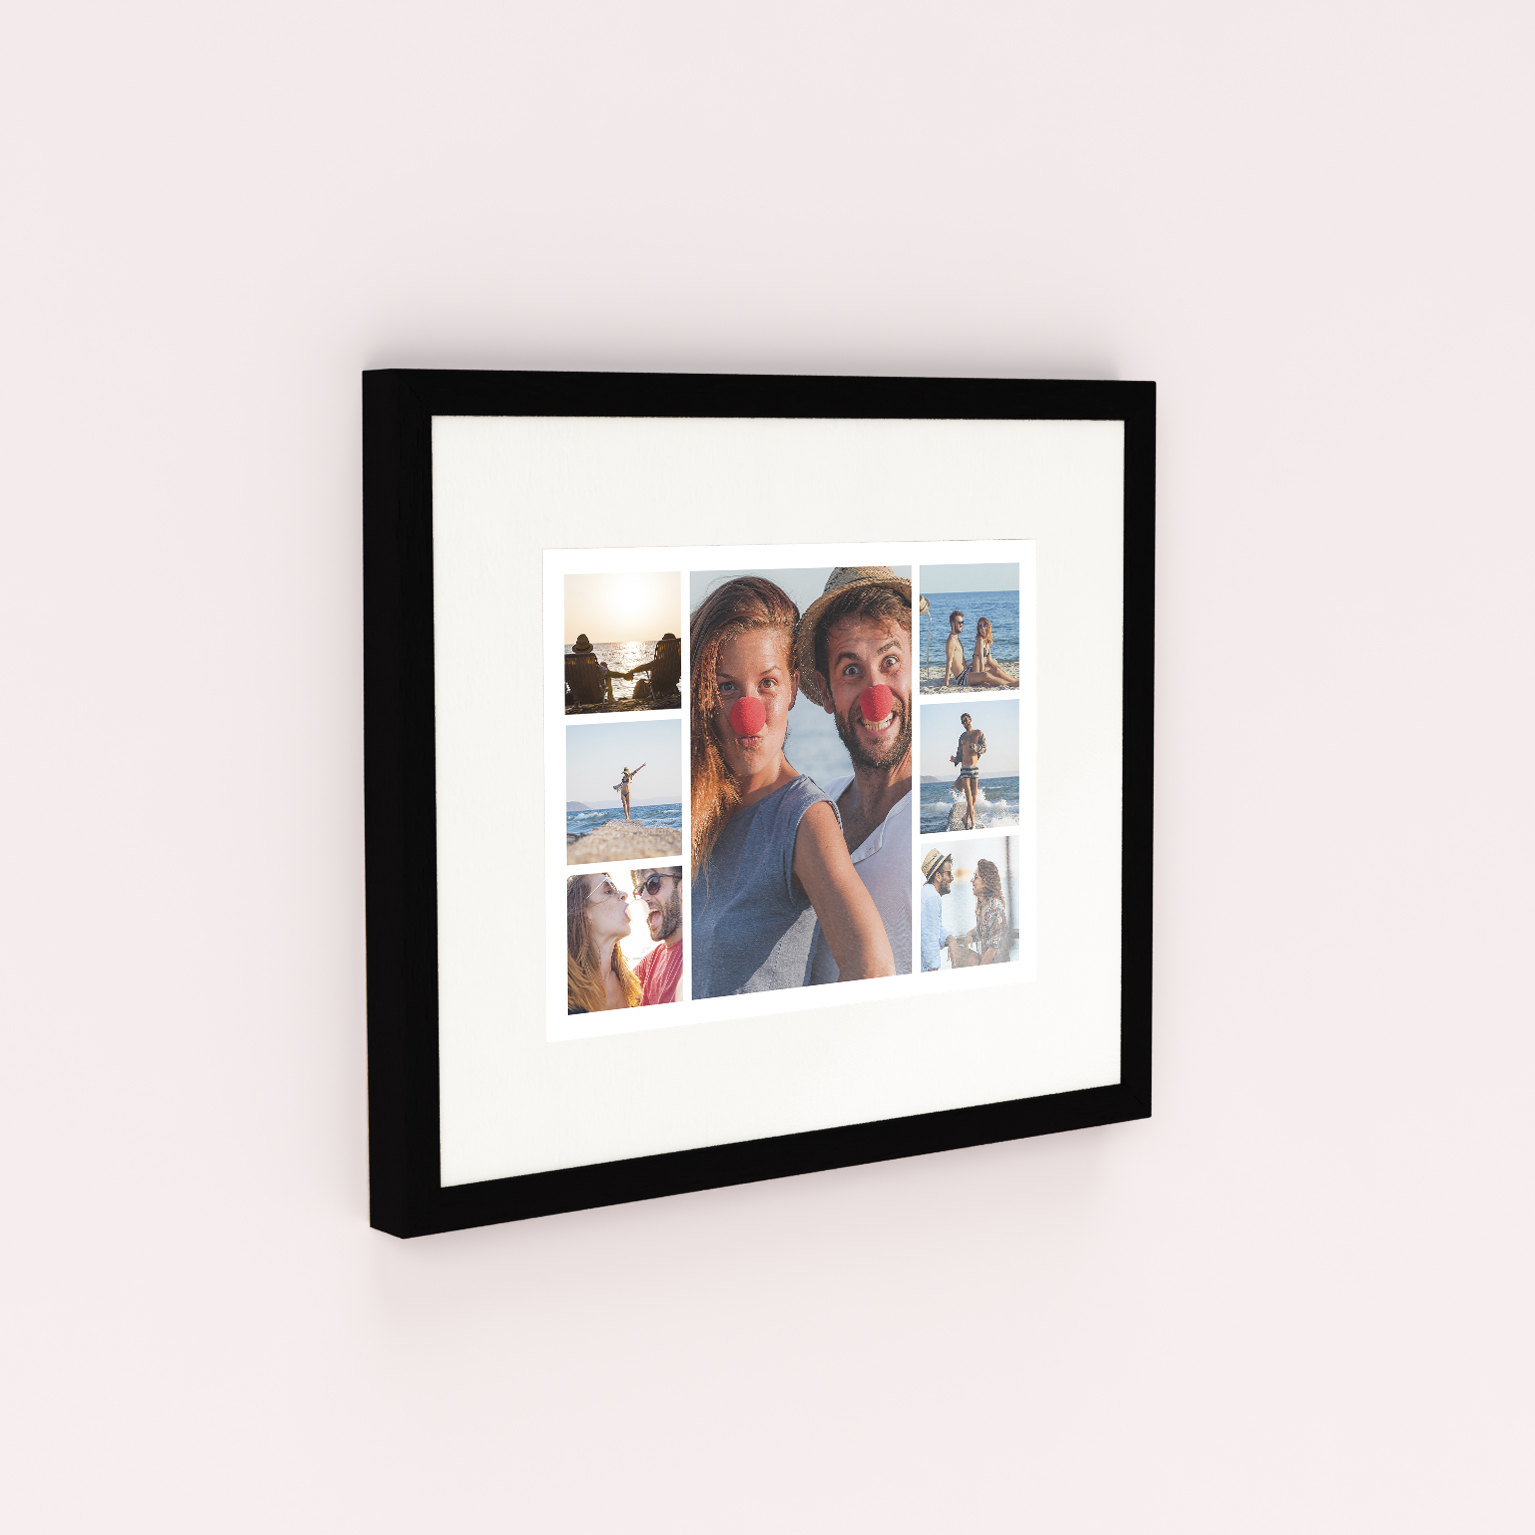 Love Collage Framed Photo Prints - Immerse your memories in this landscape-oriented print capturing seven special moments. Elegantly framed in cream, crafted on high-quality Fujifilm paper, encased in UK-handcrafted wood, available in black or white. Ready to hang, sealed for dust and humidity protection.